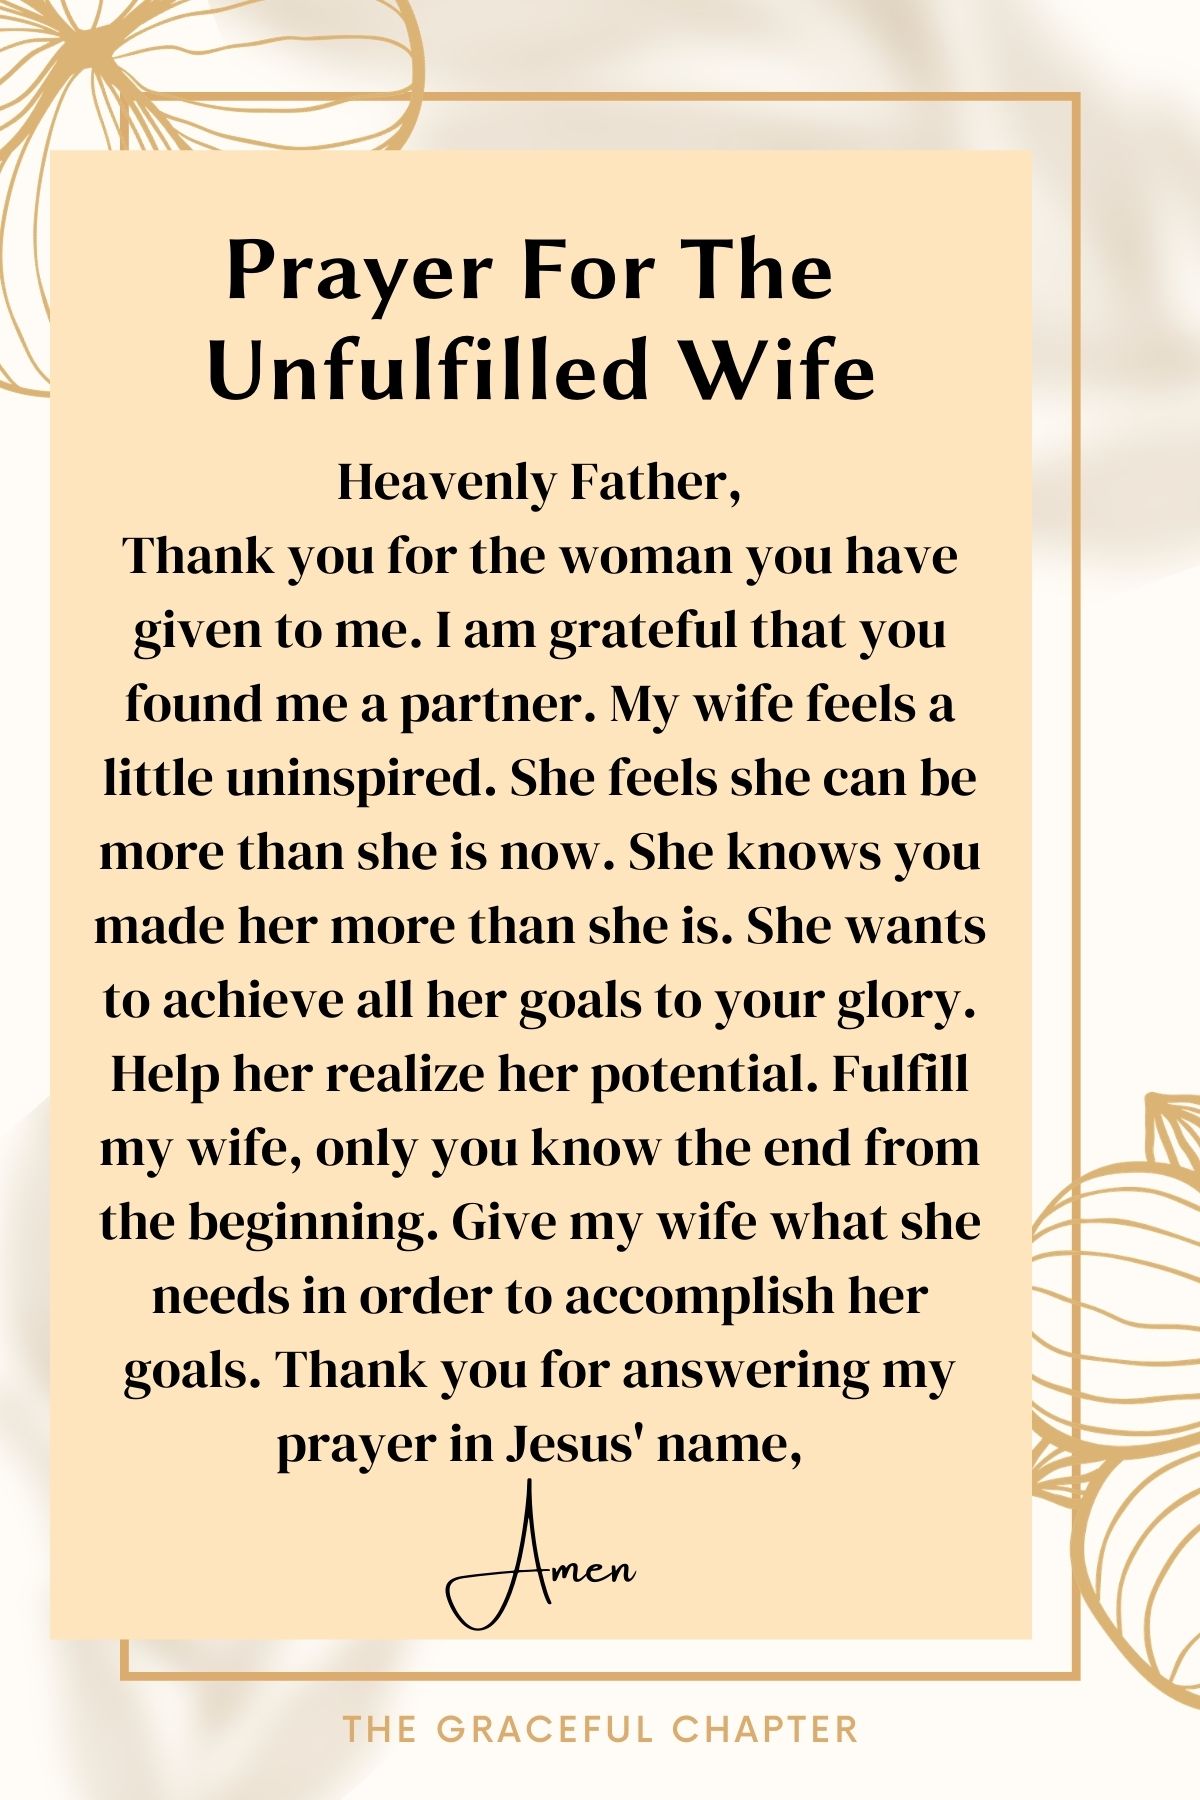 Prayer for the unfulfilled wife